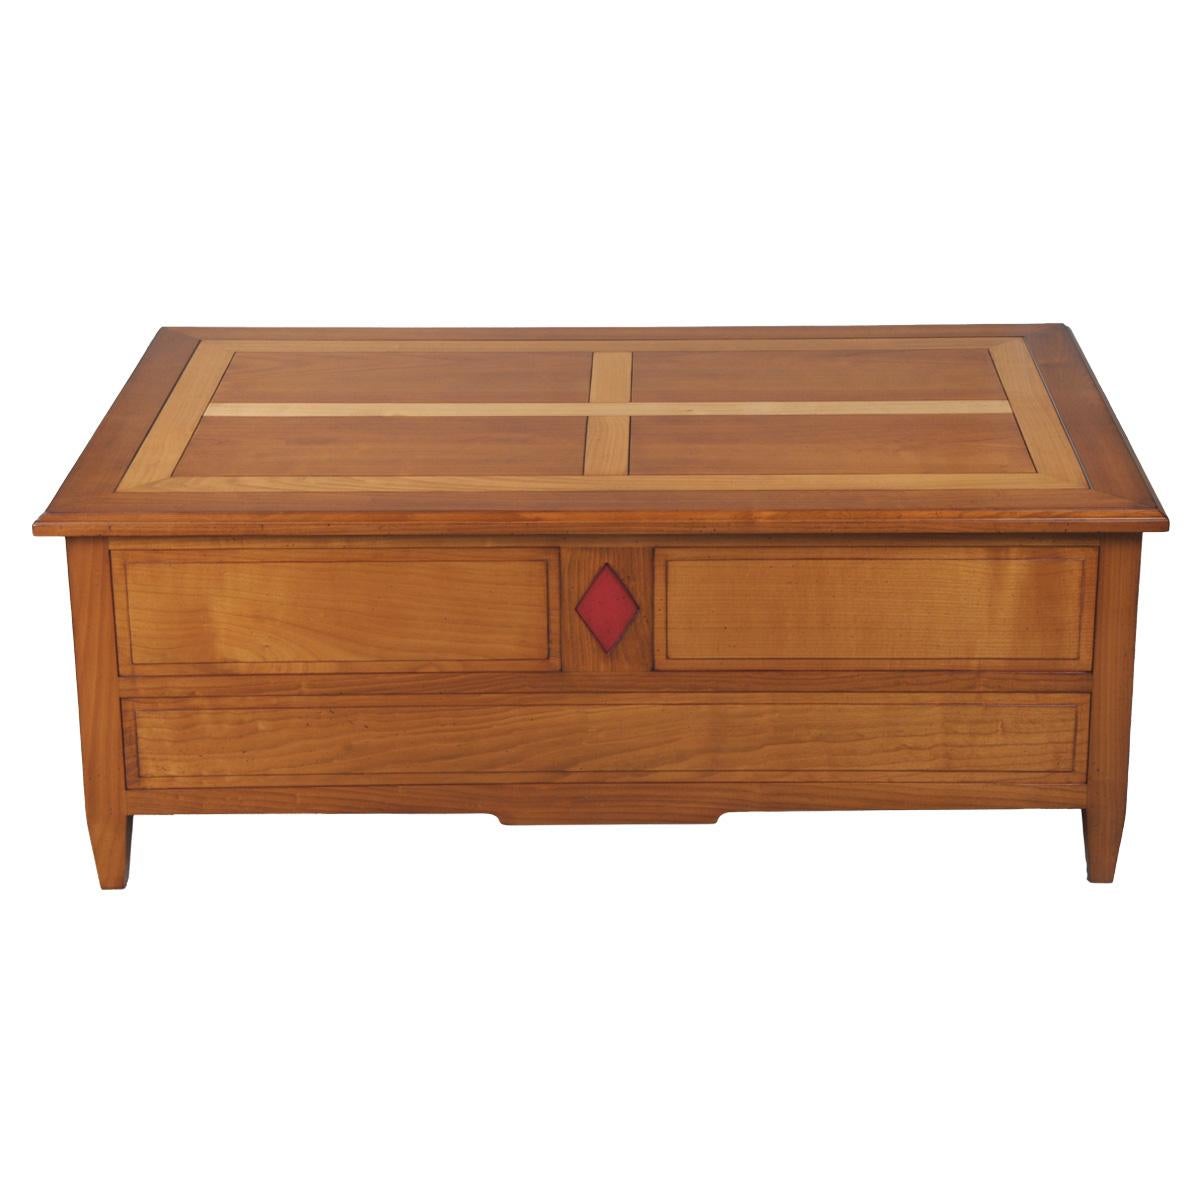 Liftable coffee table in solid cherry with storage for bottles glasses For Sale 6